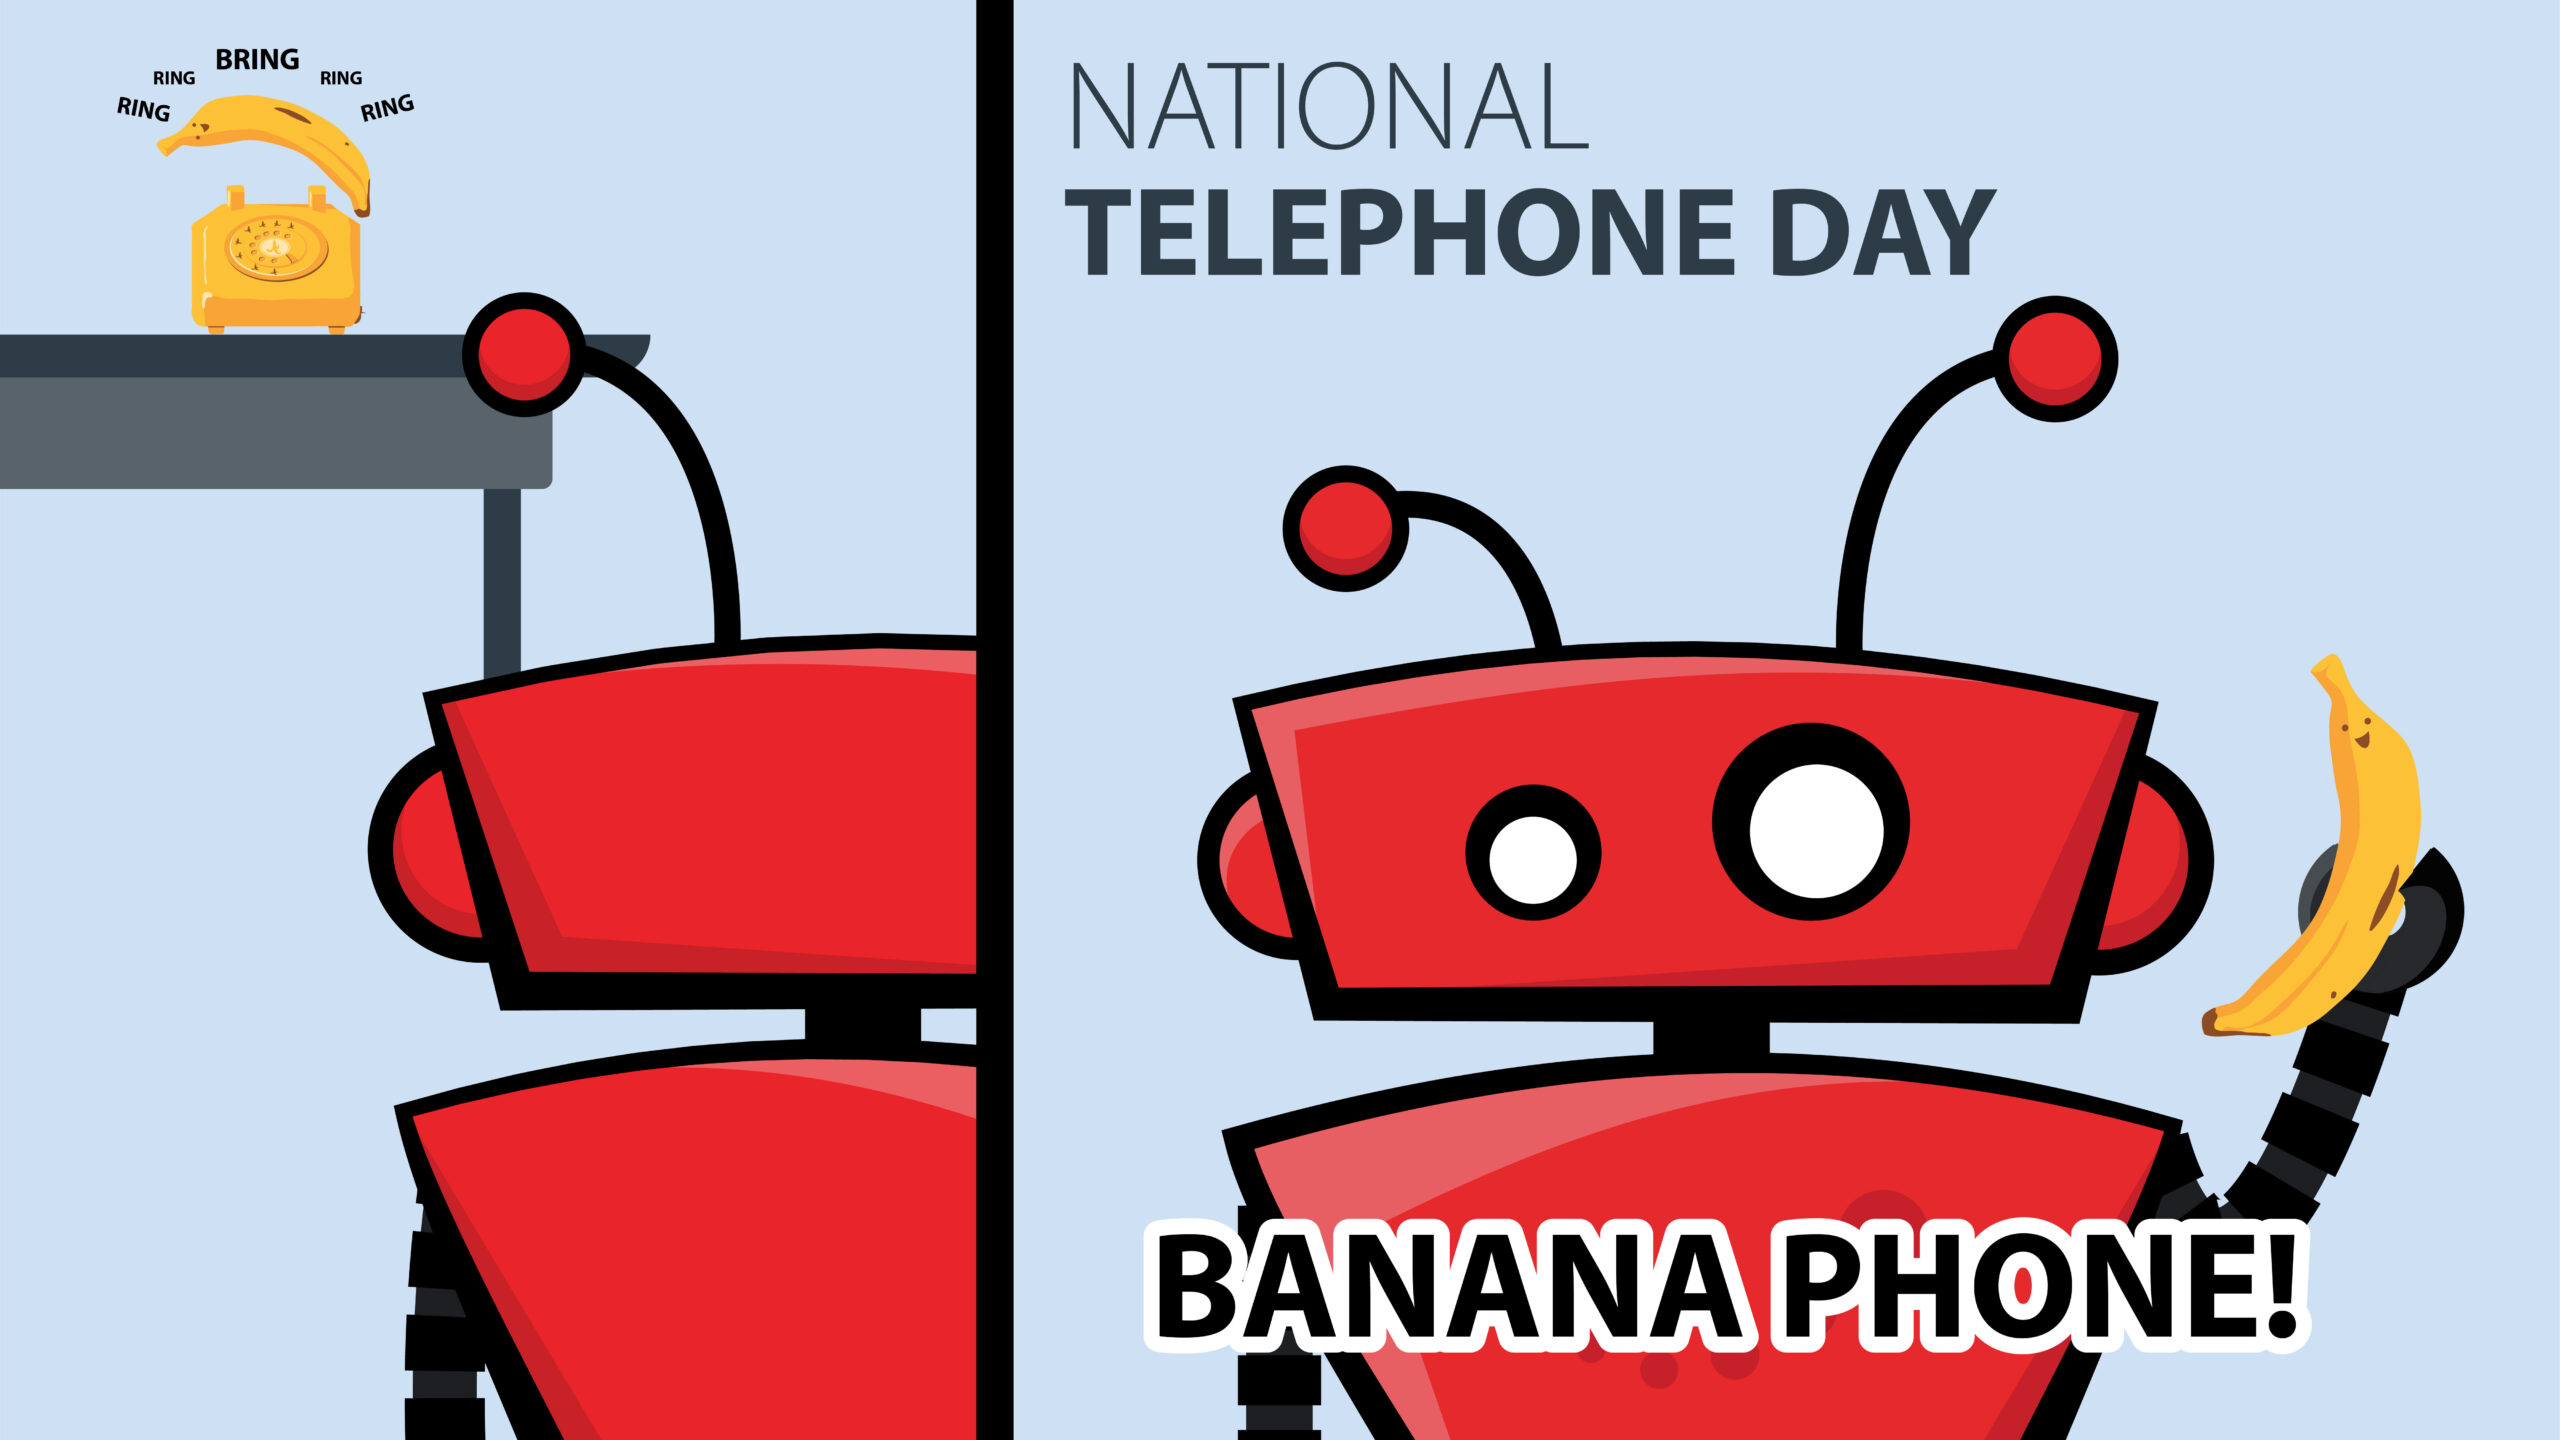 xbert with banana phone for national telephone day